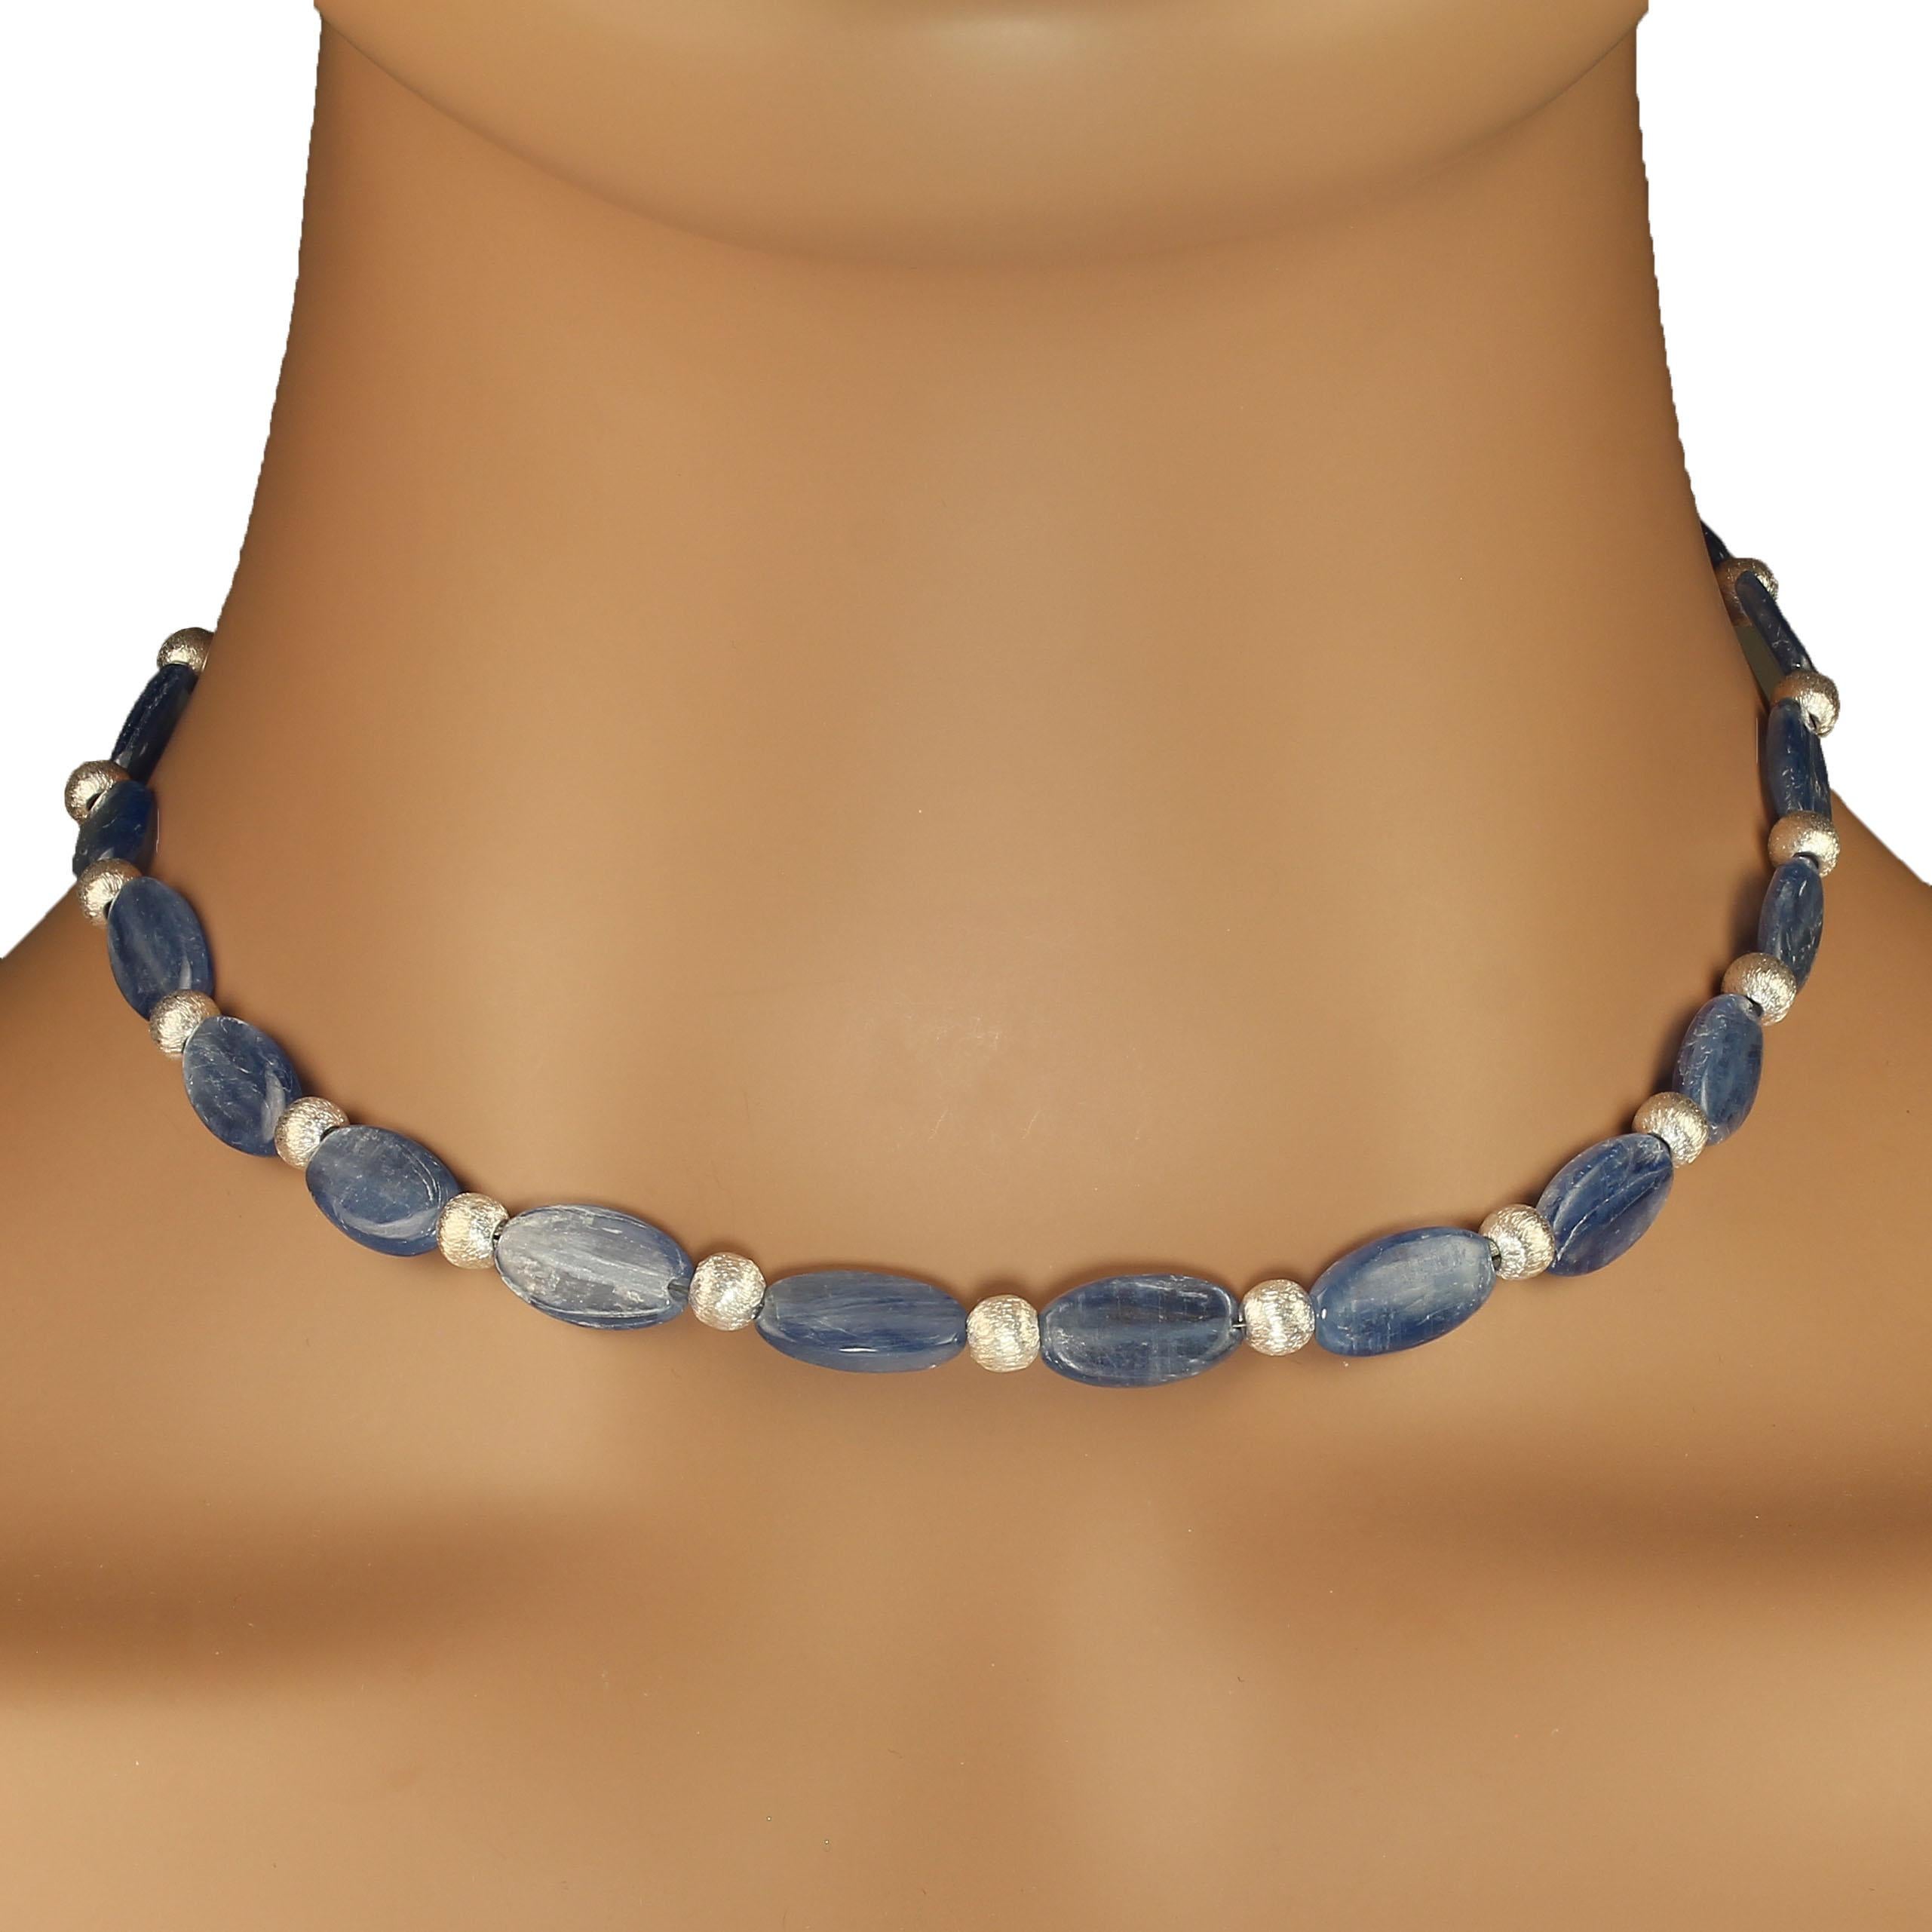 AJD 15 Inch Choker of Blue Oval Kyanite and silver beads     Perfect Gift For Sale